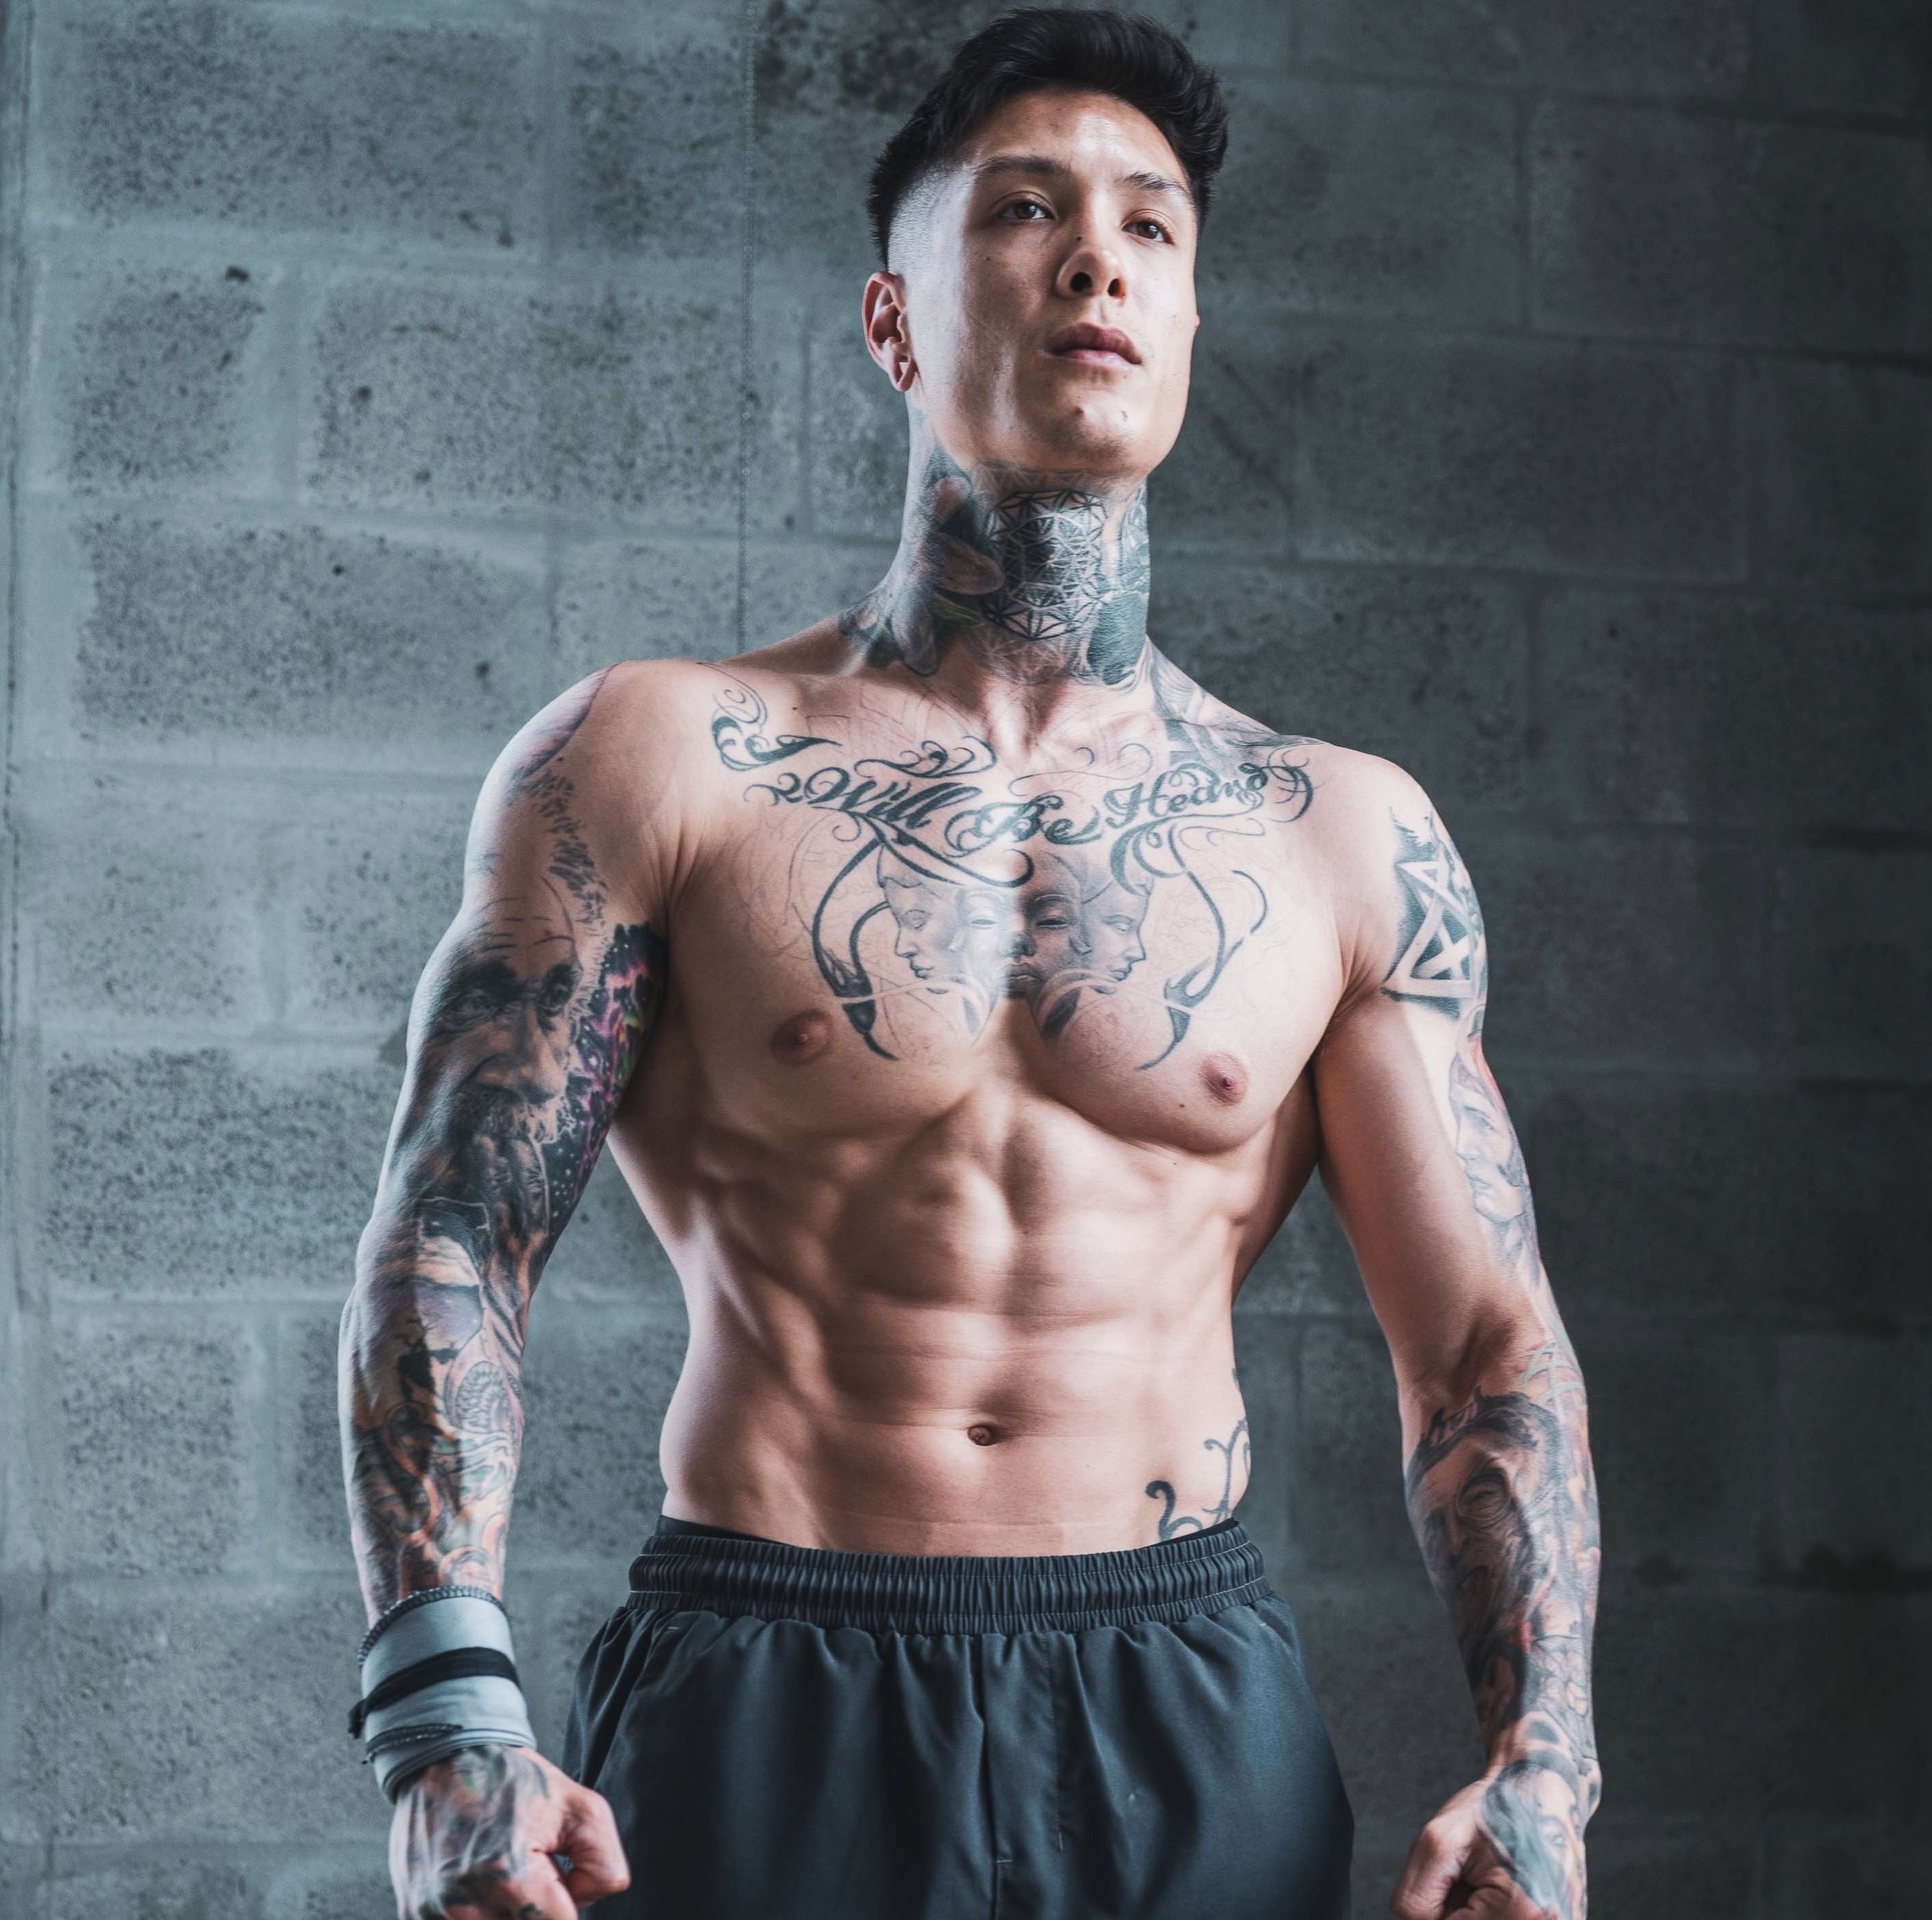 Chris Heria Shares the Inspiration Behind His Bodyweight Workout Empire